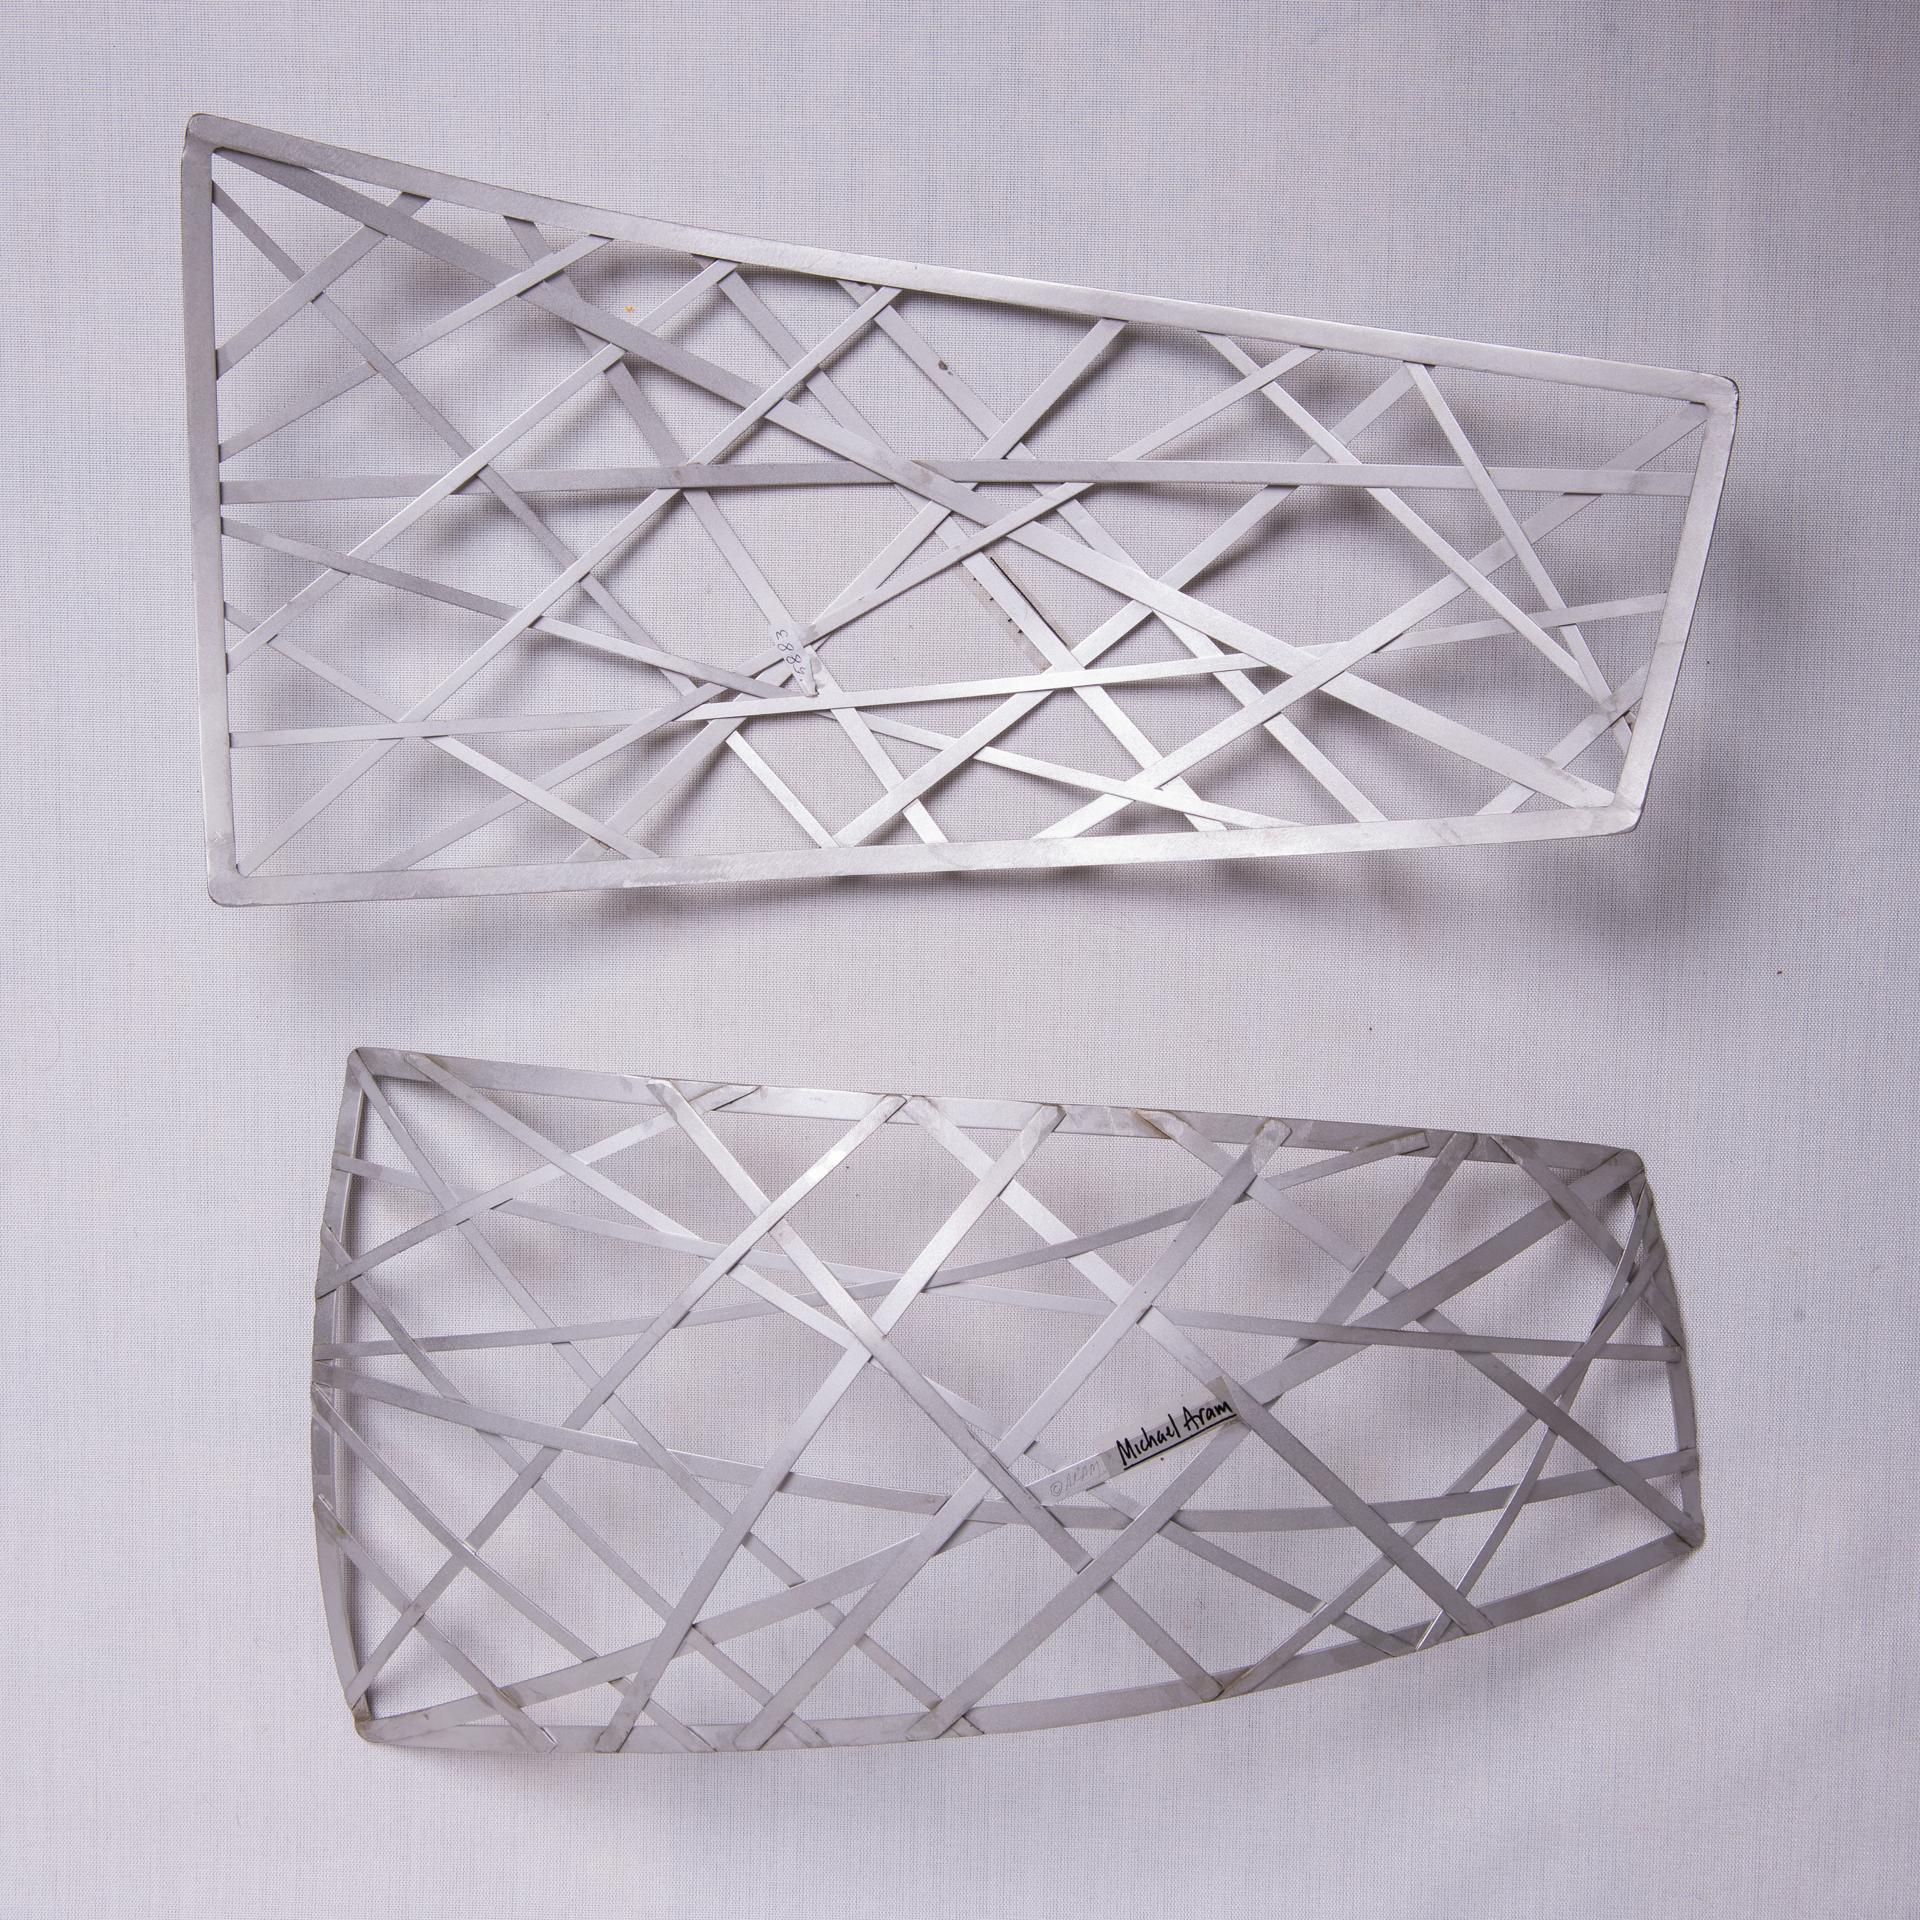 Pair of Criss Cross, the famous trays, dated some years ago, by Michael Aram . They are decorative trays in anodized aluminum (or steel ?), suitable for fruit or mail.
The price is for one.